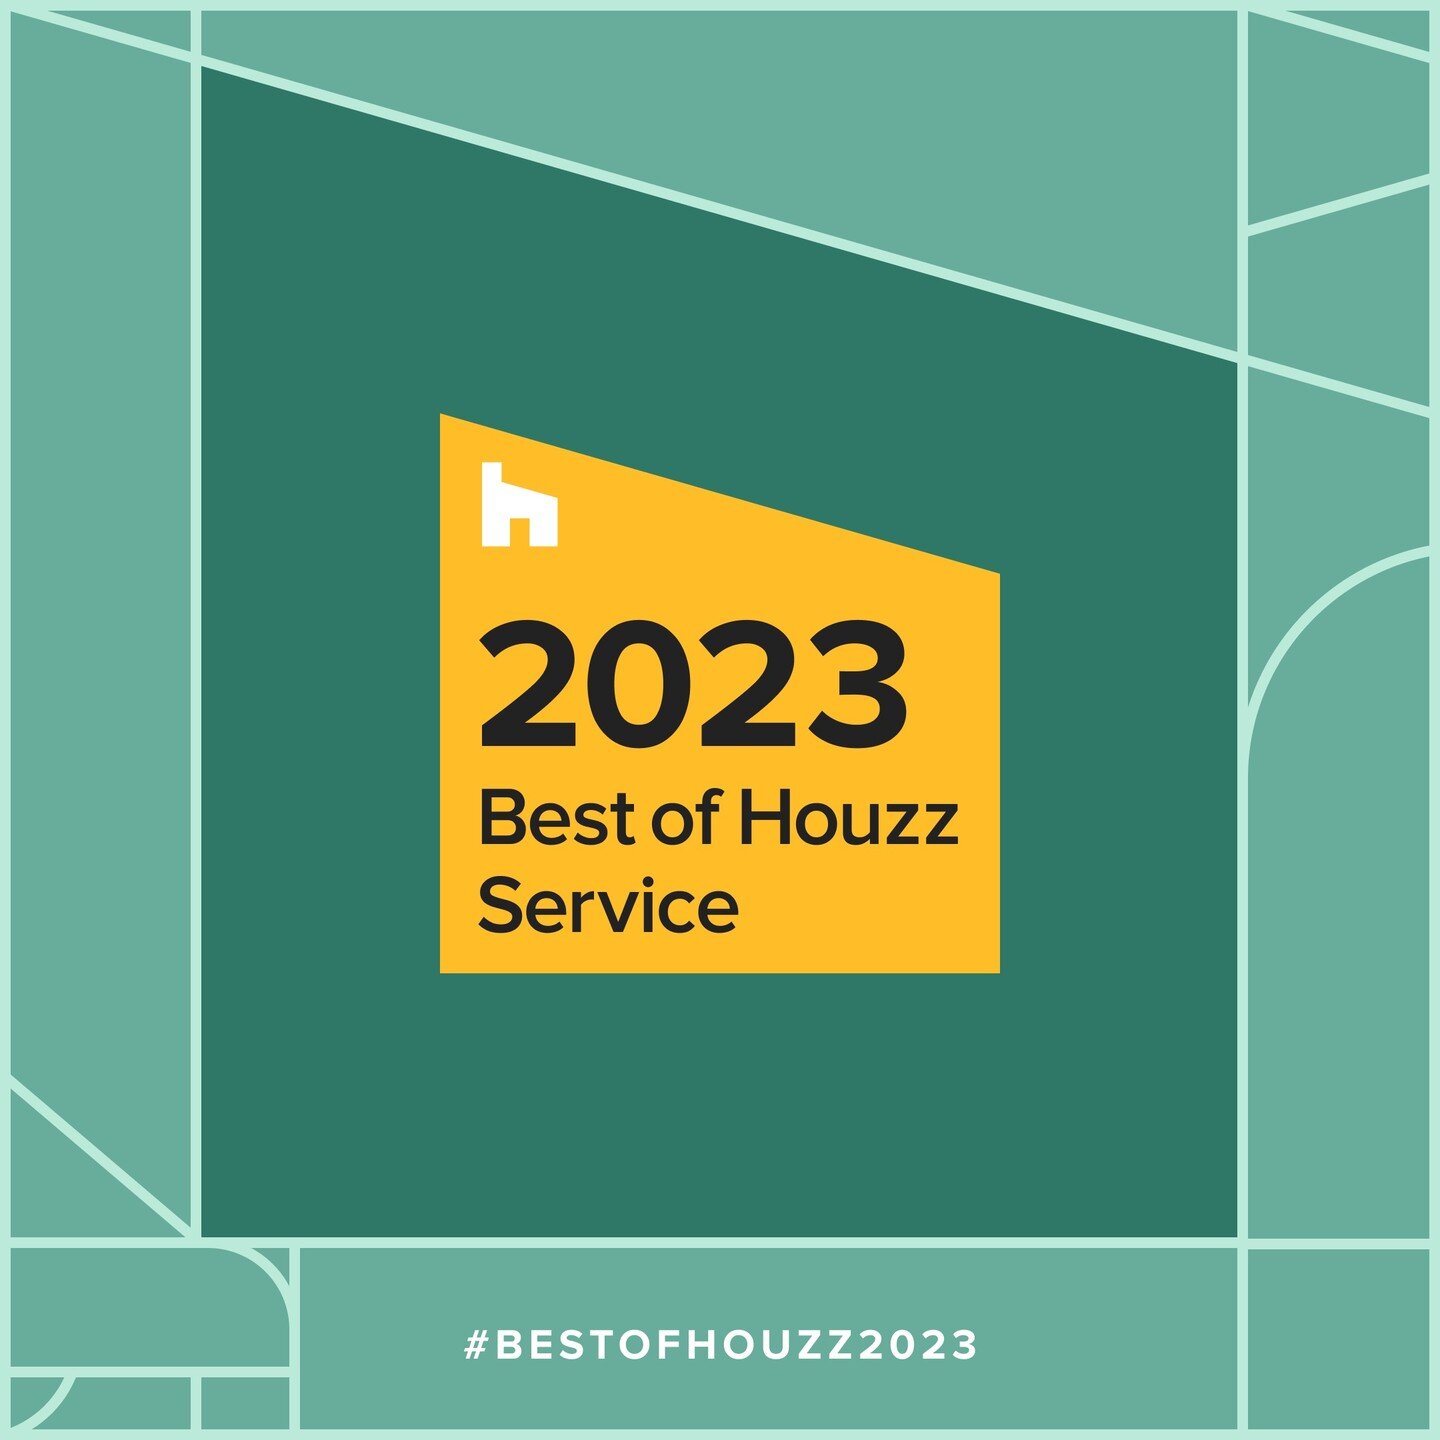 Thrilled to share that AE Thomas Design is a Best of Houzz 2023 winner! We&rsquo;re so proud of all this team has accomplished and honored to be recognized for the hard work we put in on behalf of our clients.

@houzz @houzzpro #BestofHouzz2023 #Best